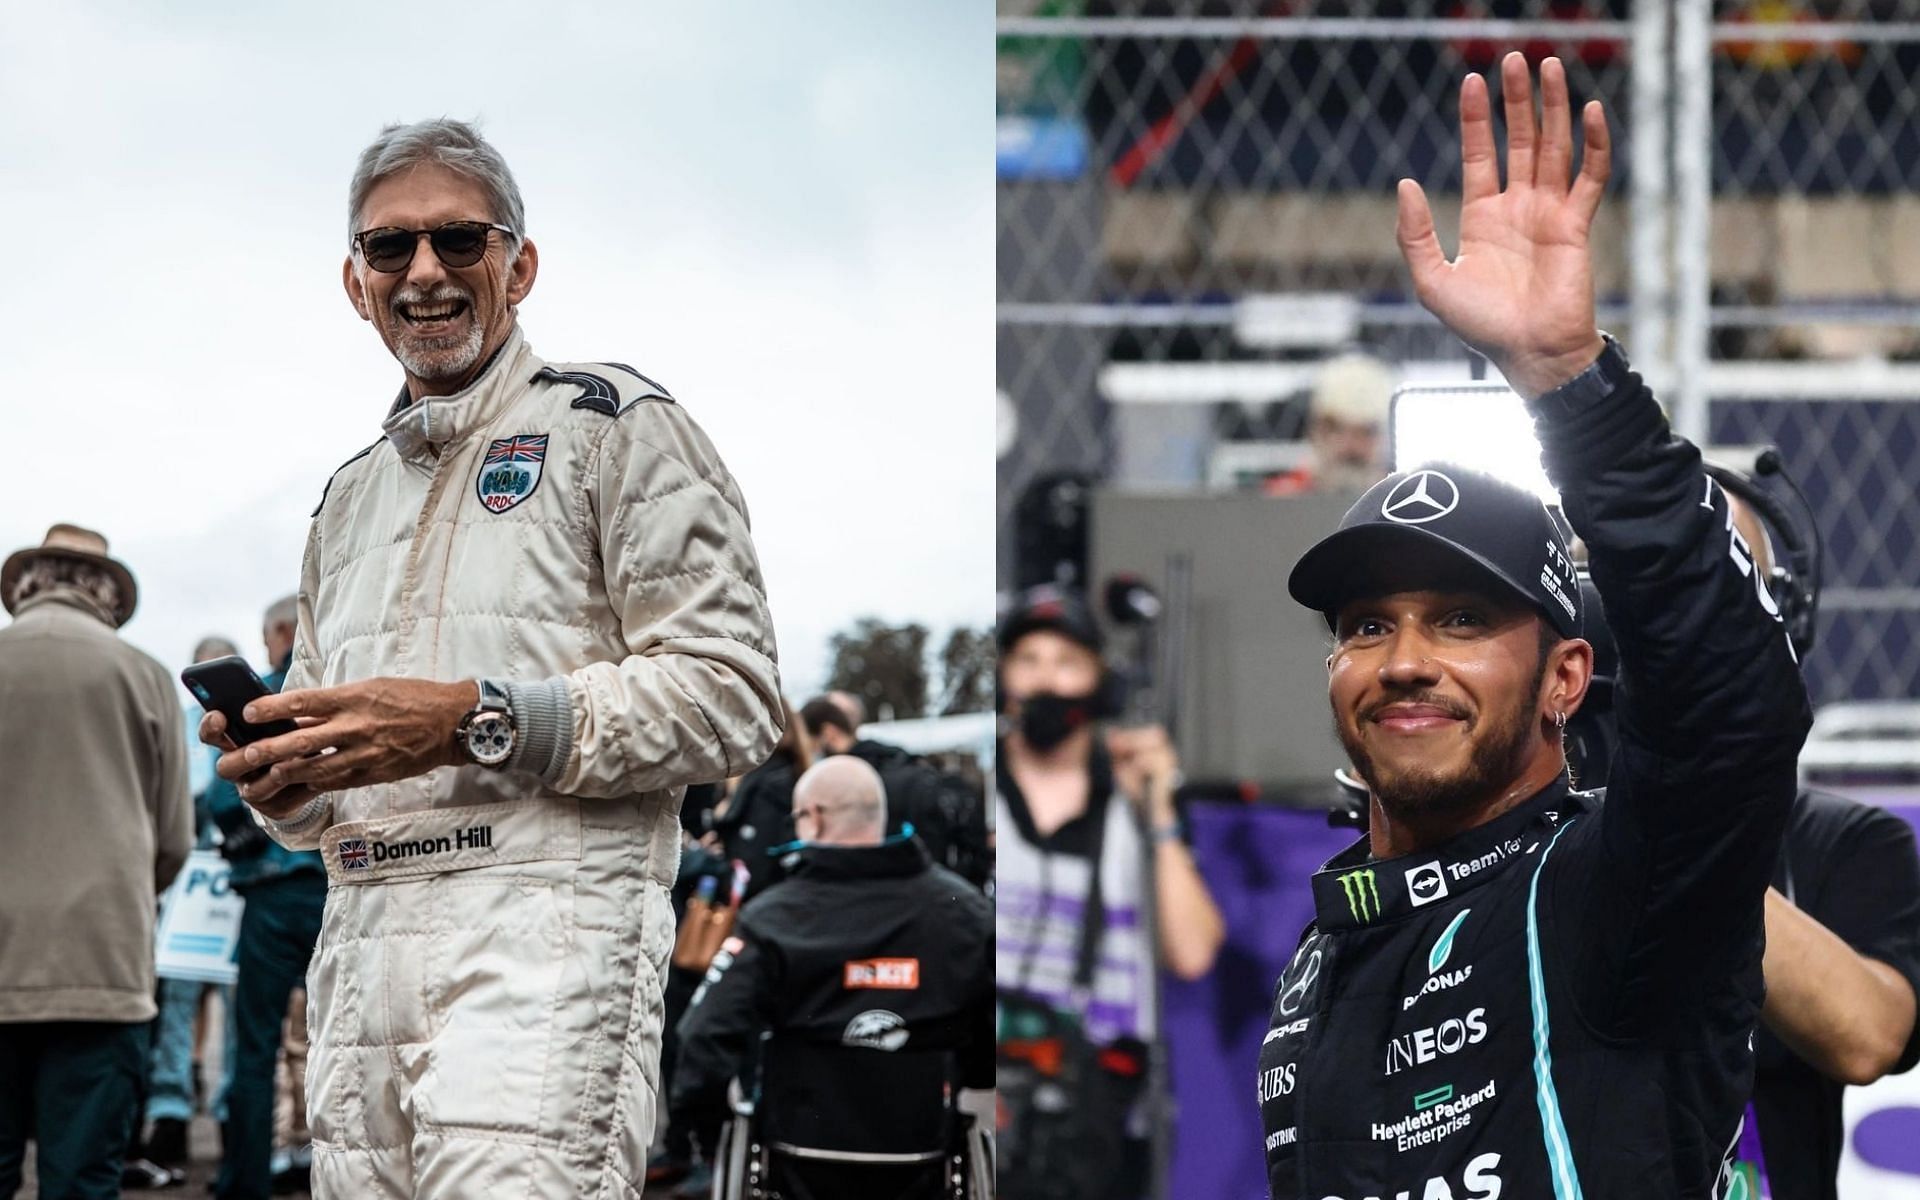 Damon Hill (left) has made a Twitter poll especially for angry fans of Lewis Hamilton (right).